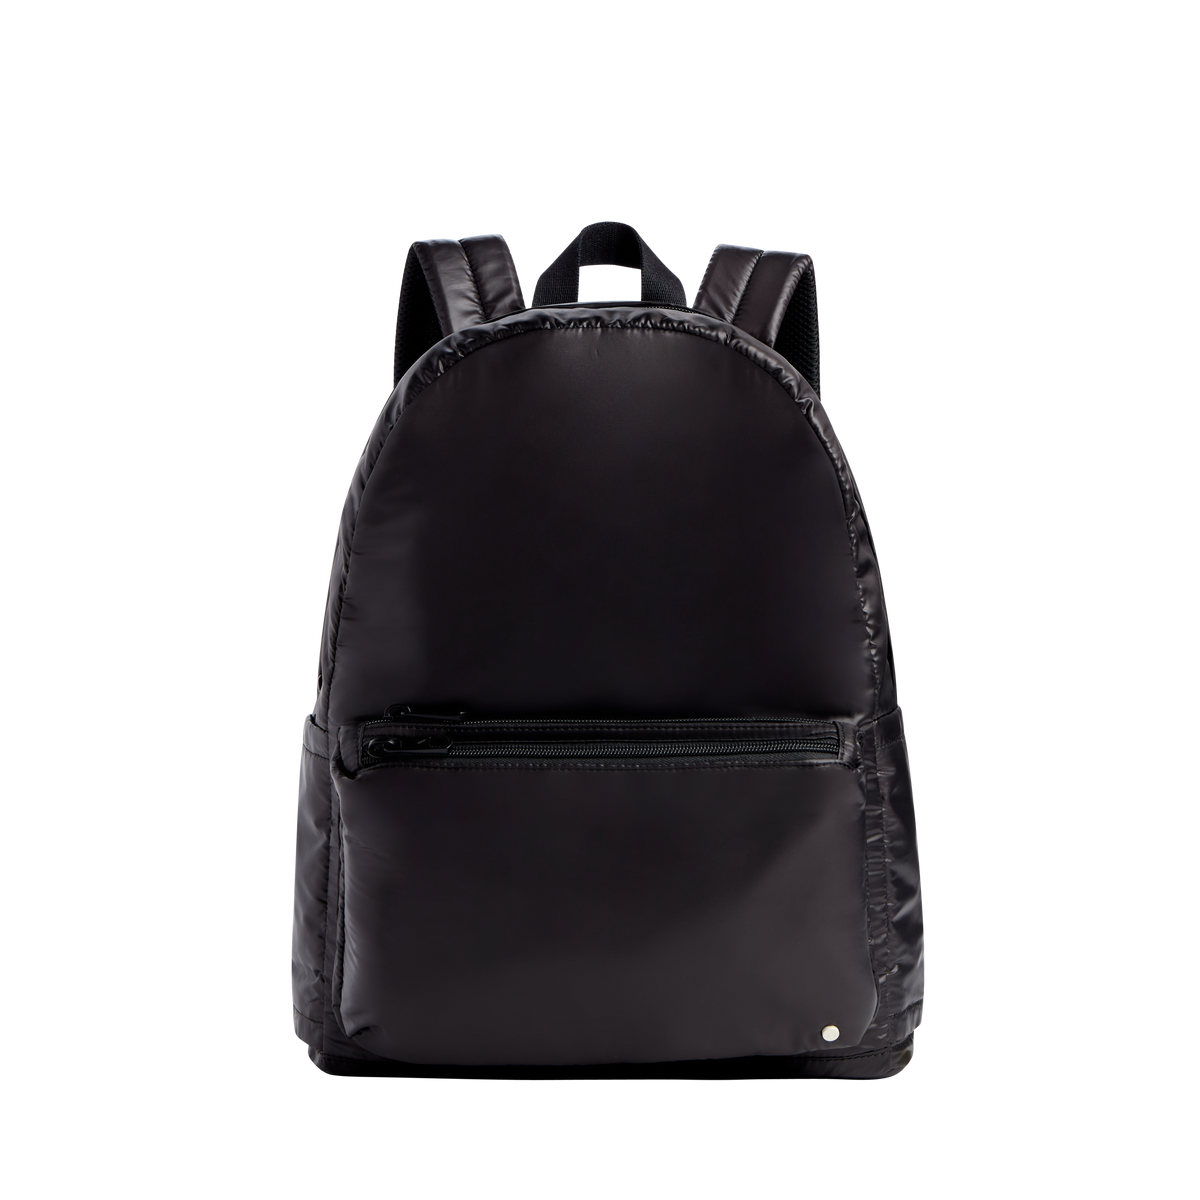 STATE Bags | Lorimer with Pockets Coated Nylon Black